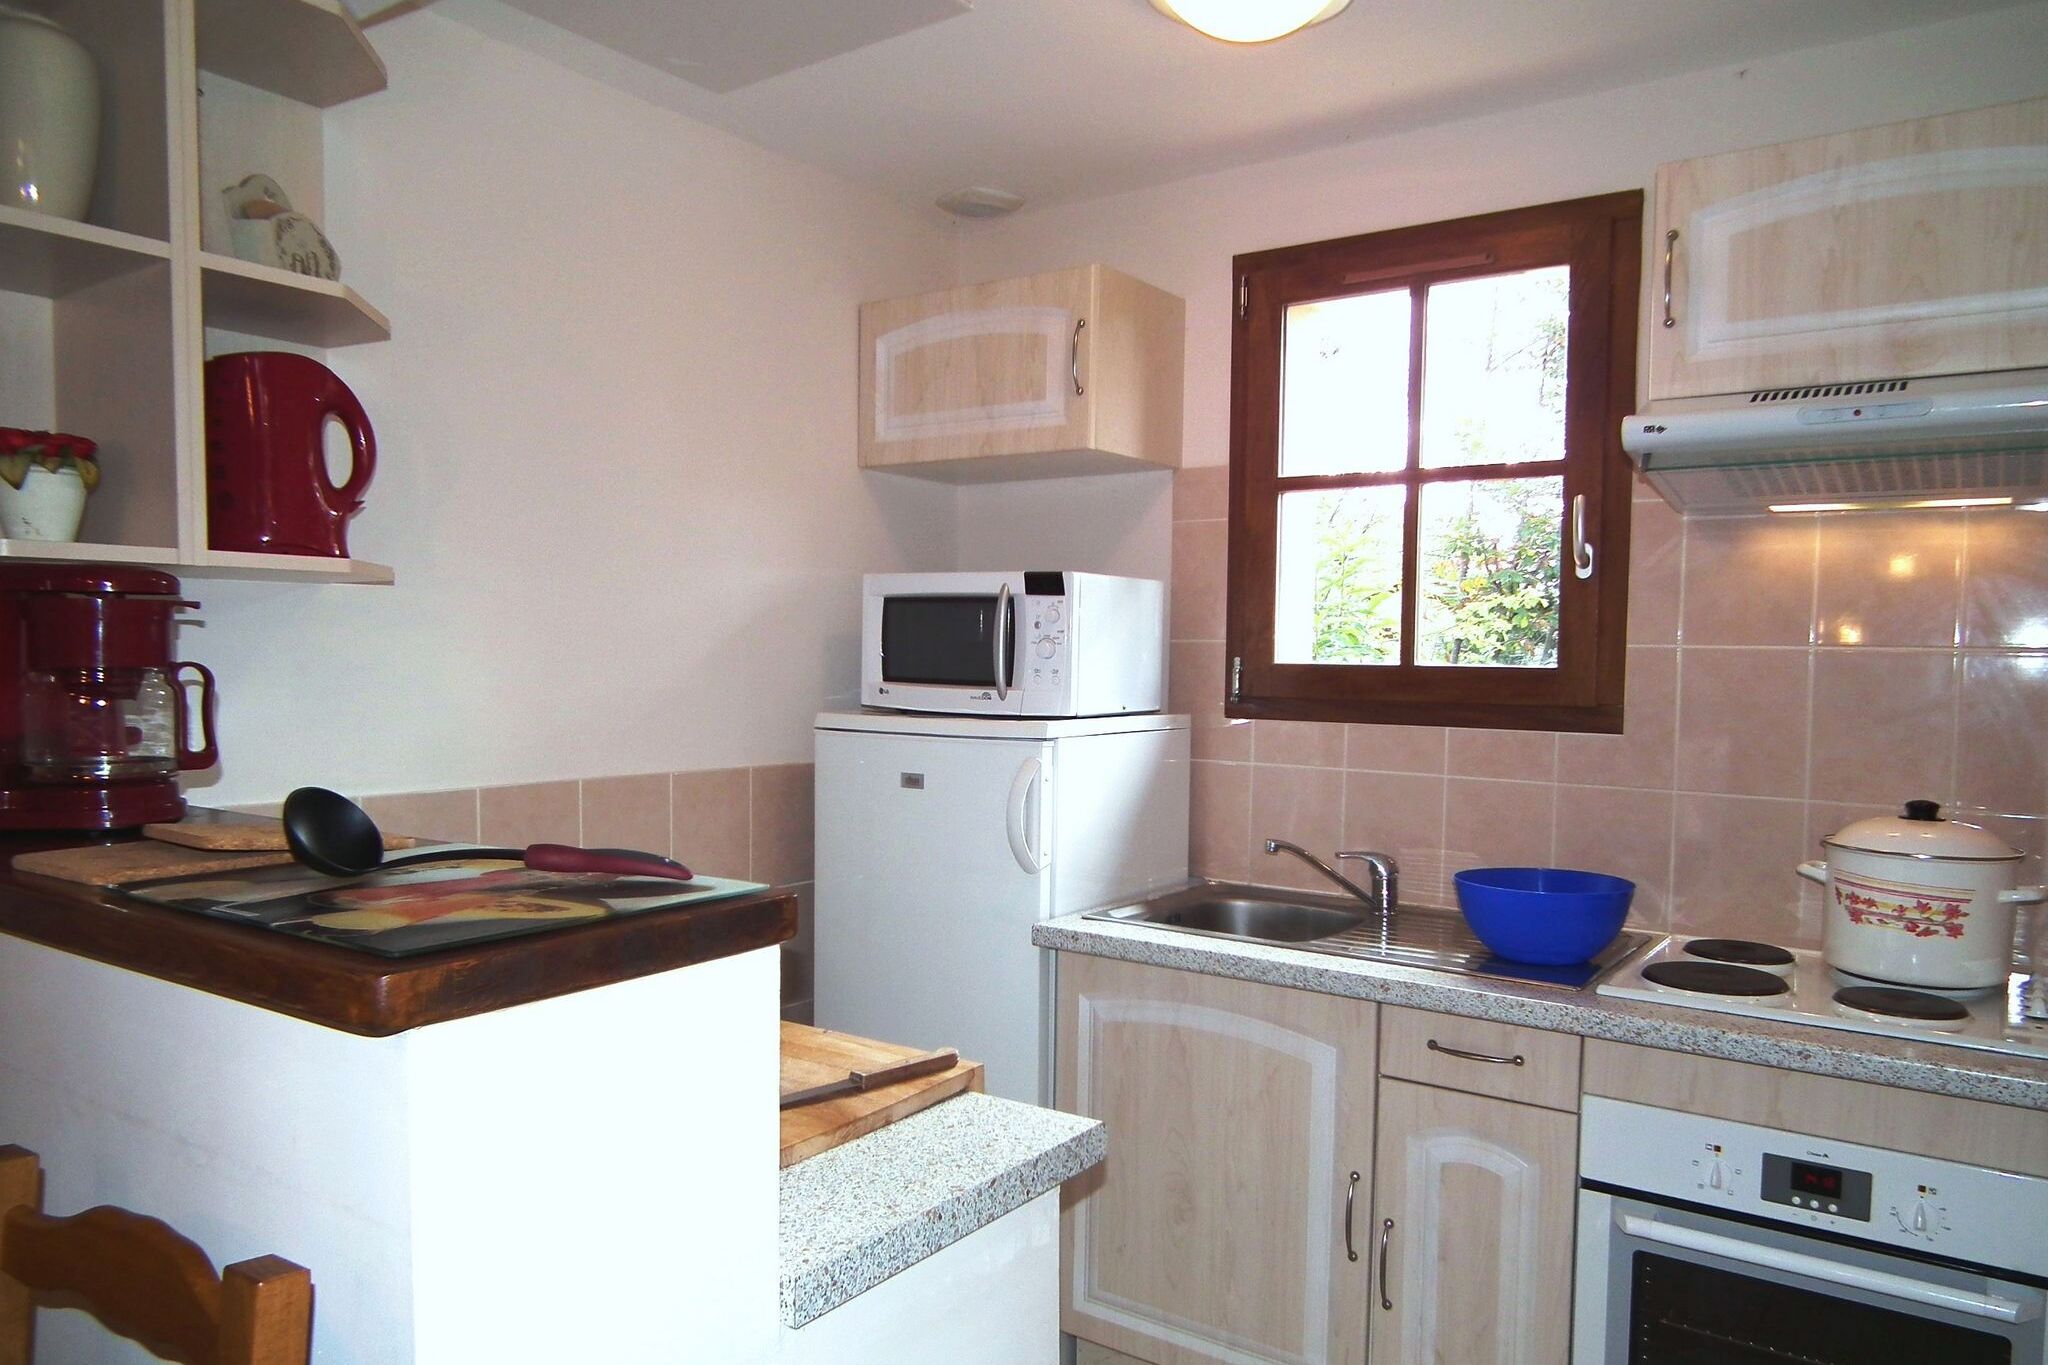 Nice villa with dishwasher located in the Dordogne